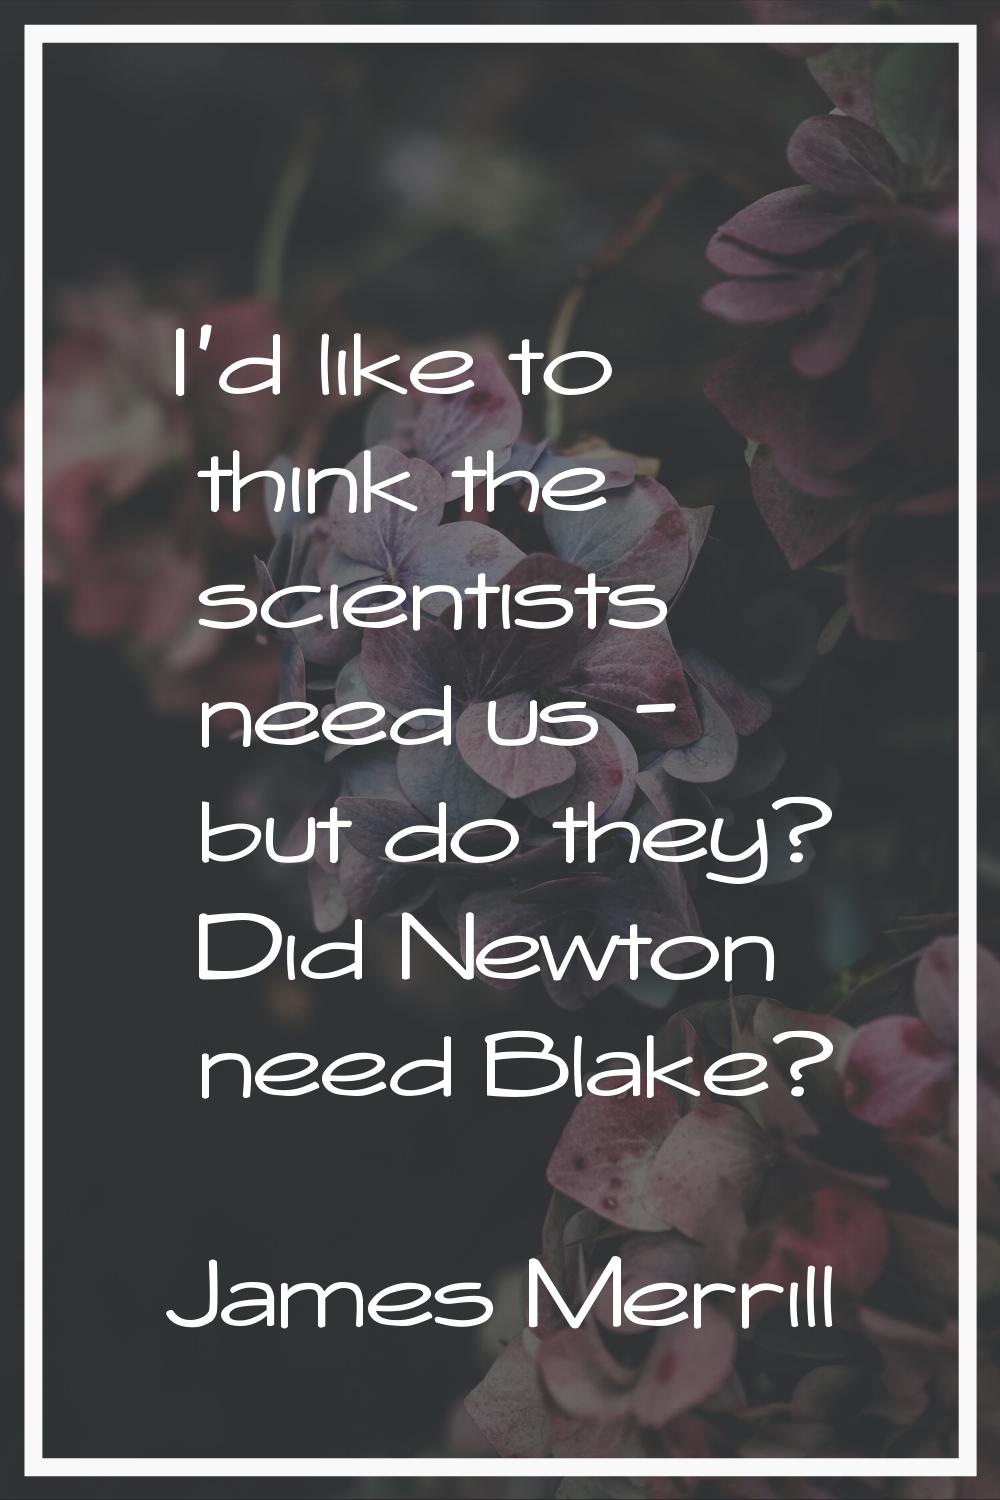 I'd like to think the scientists need us - but do they? Did Newton need Blake?